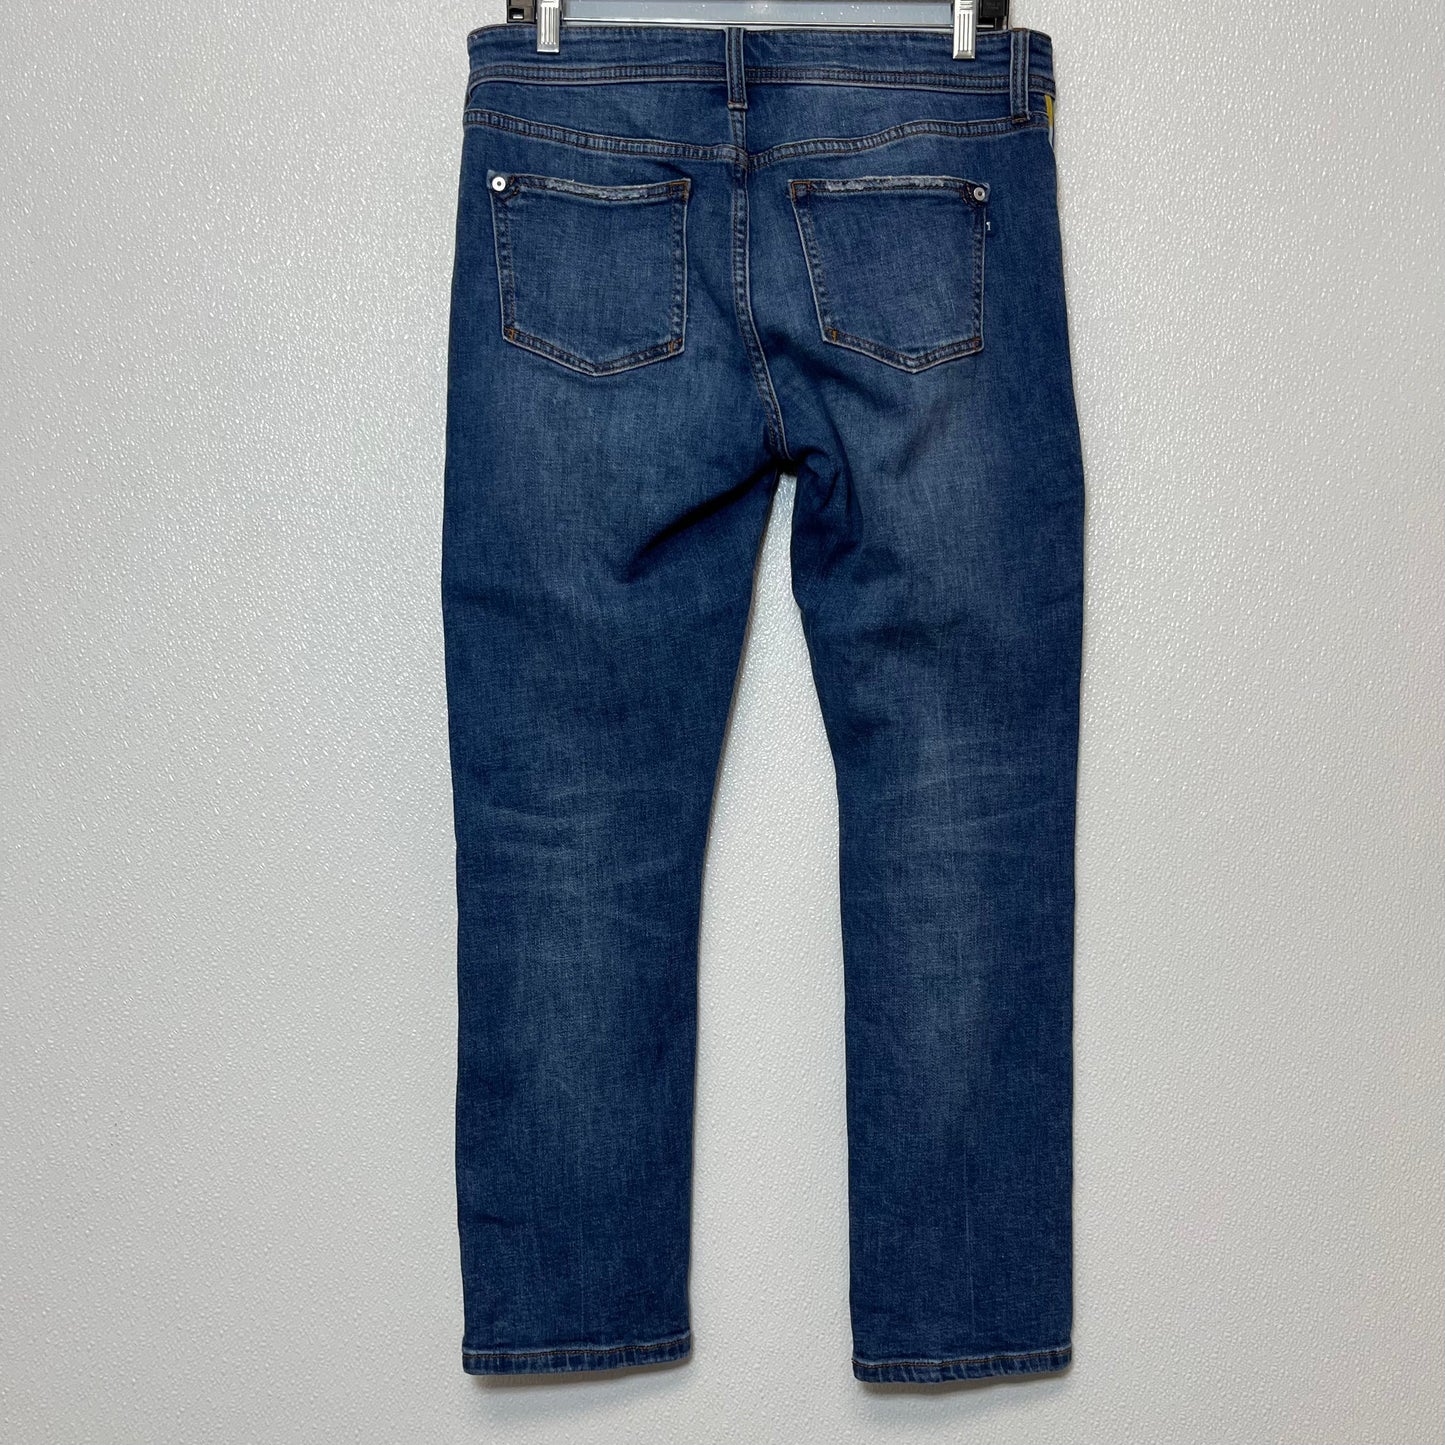 Jeans Skinny By Pilcro  Size: 8petite